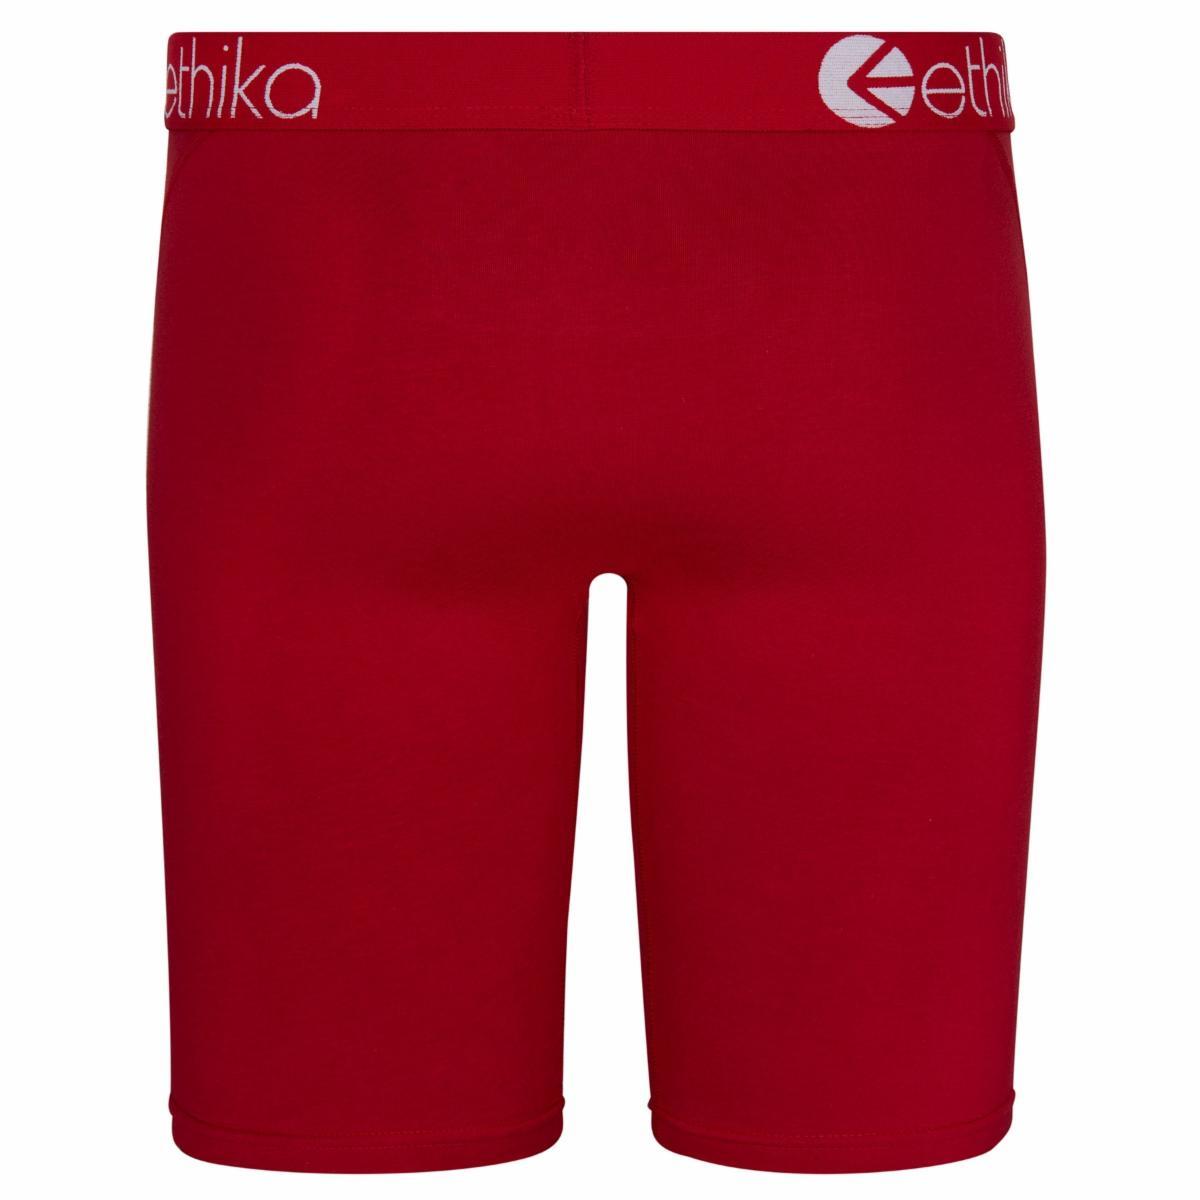 Ethika Cayenne Red Staple Boxers